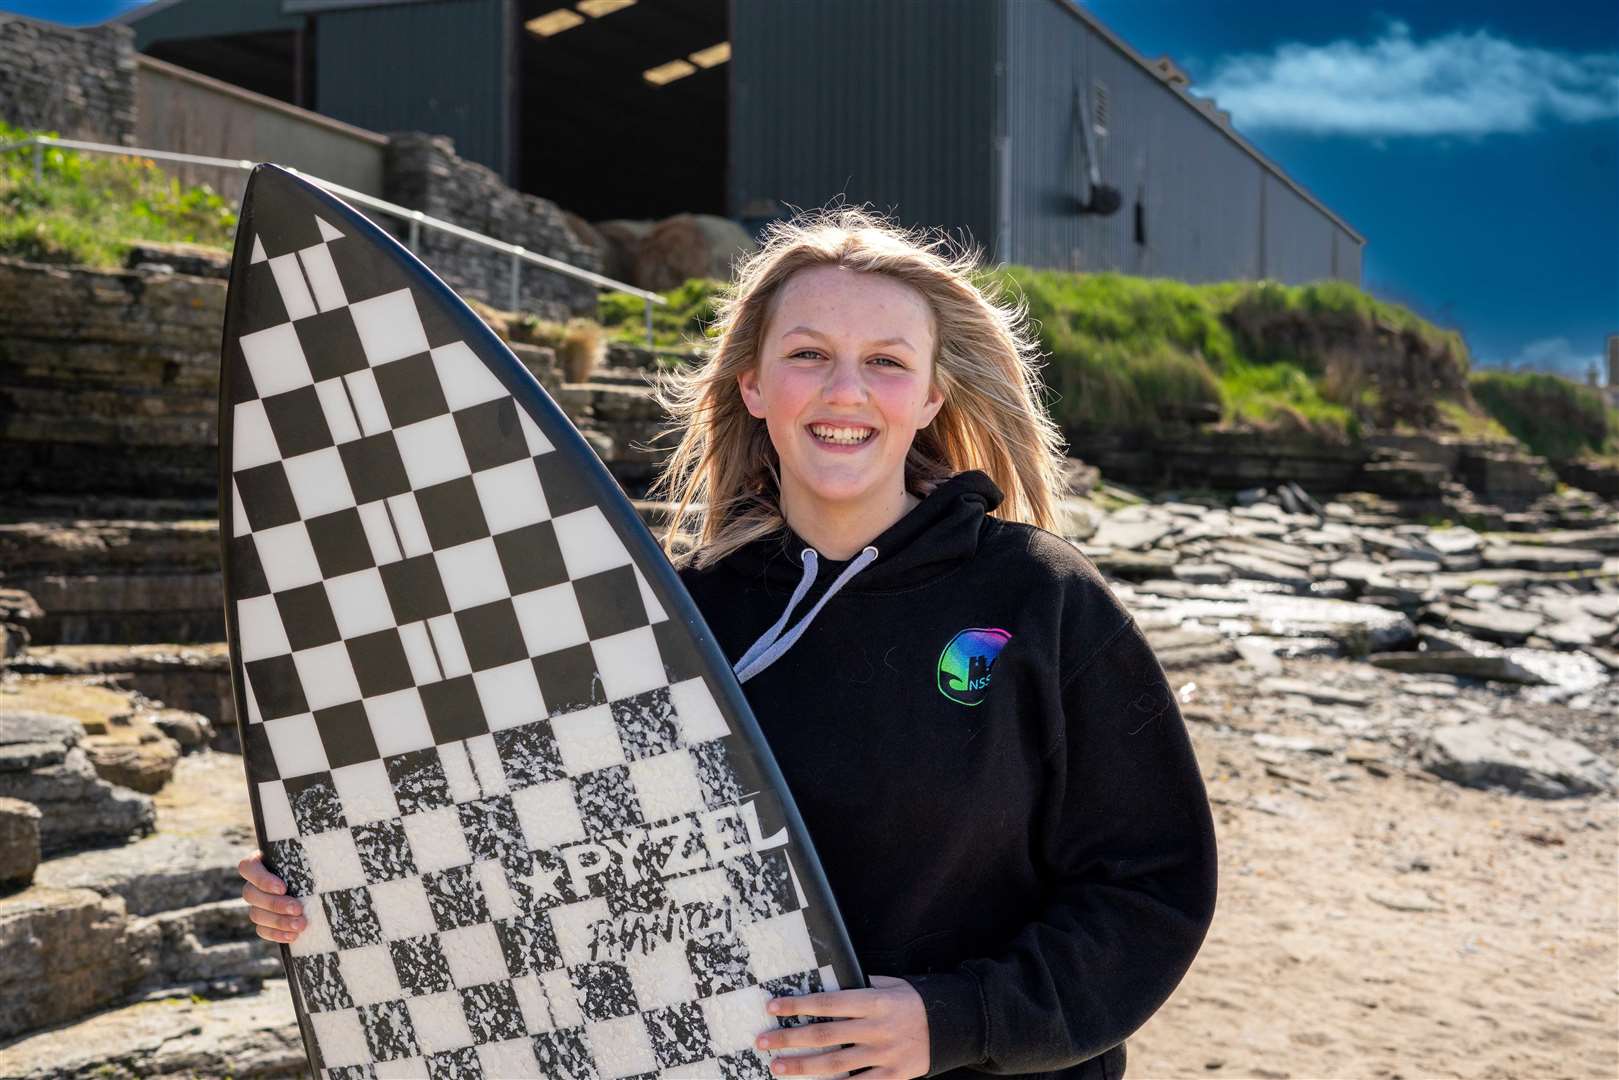 North Shore Surf Club member Nadia Murray has been surfing since 2018. Picture: Malcolm Anderson